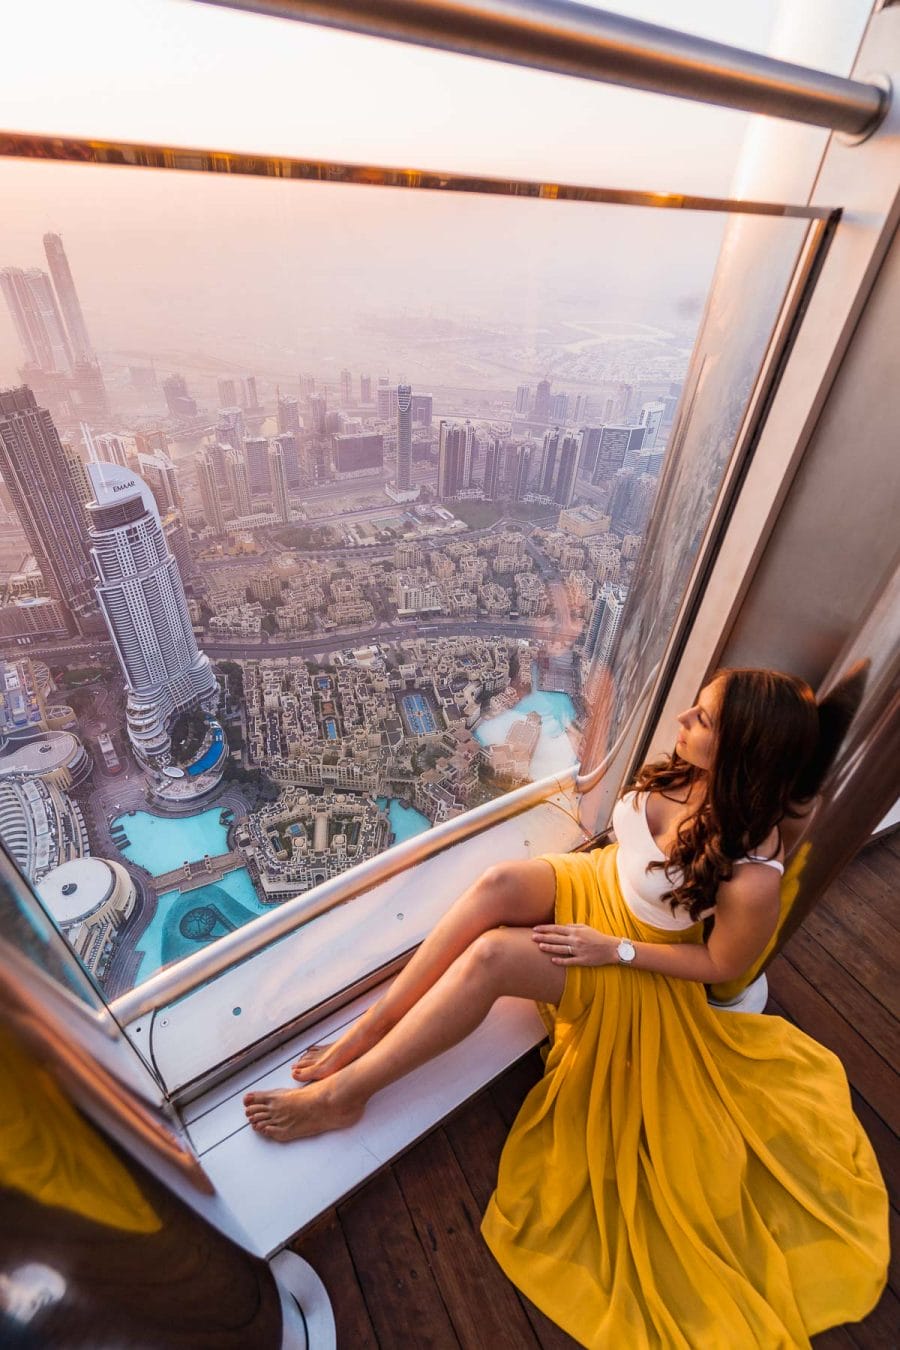 Girl in a yellow skirt sitting in front of a window in the Burj Khalifa at sunrise with the Dubai skyline in the background